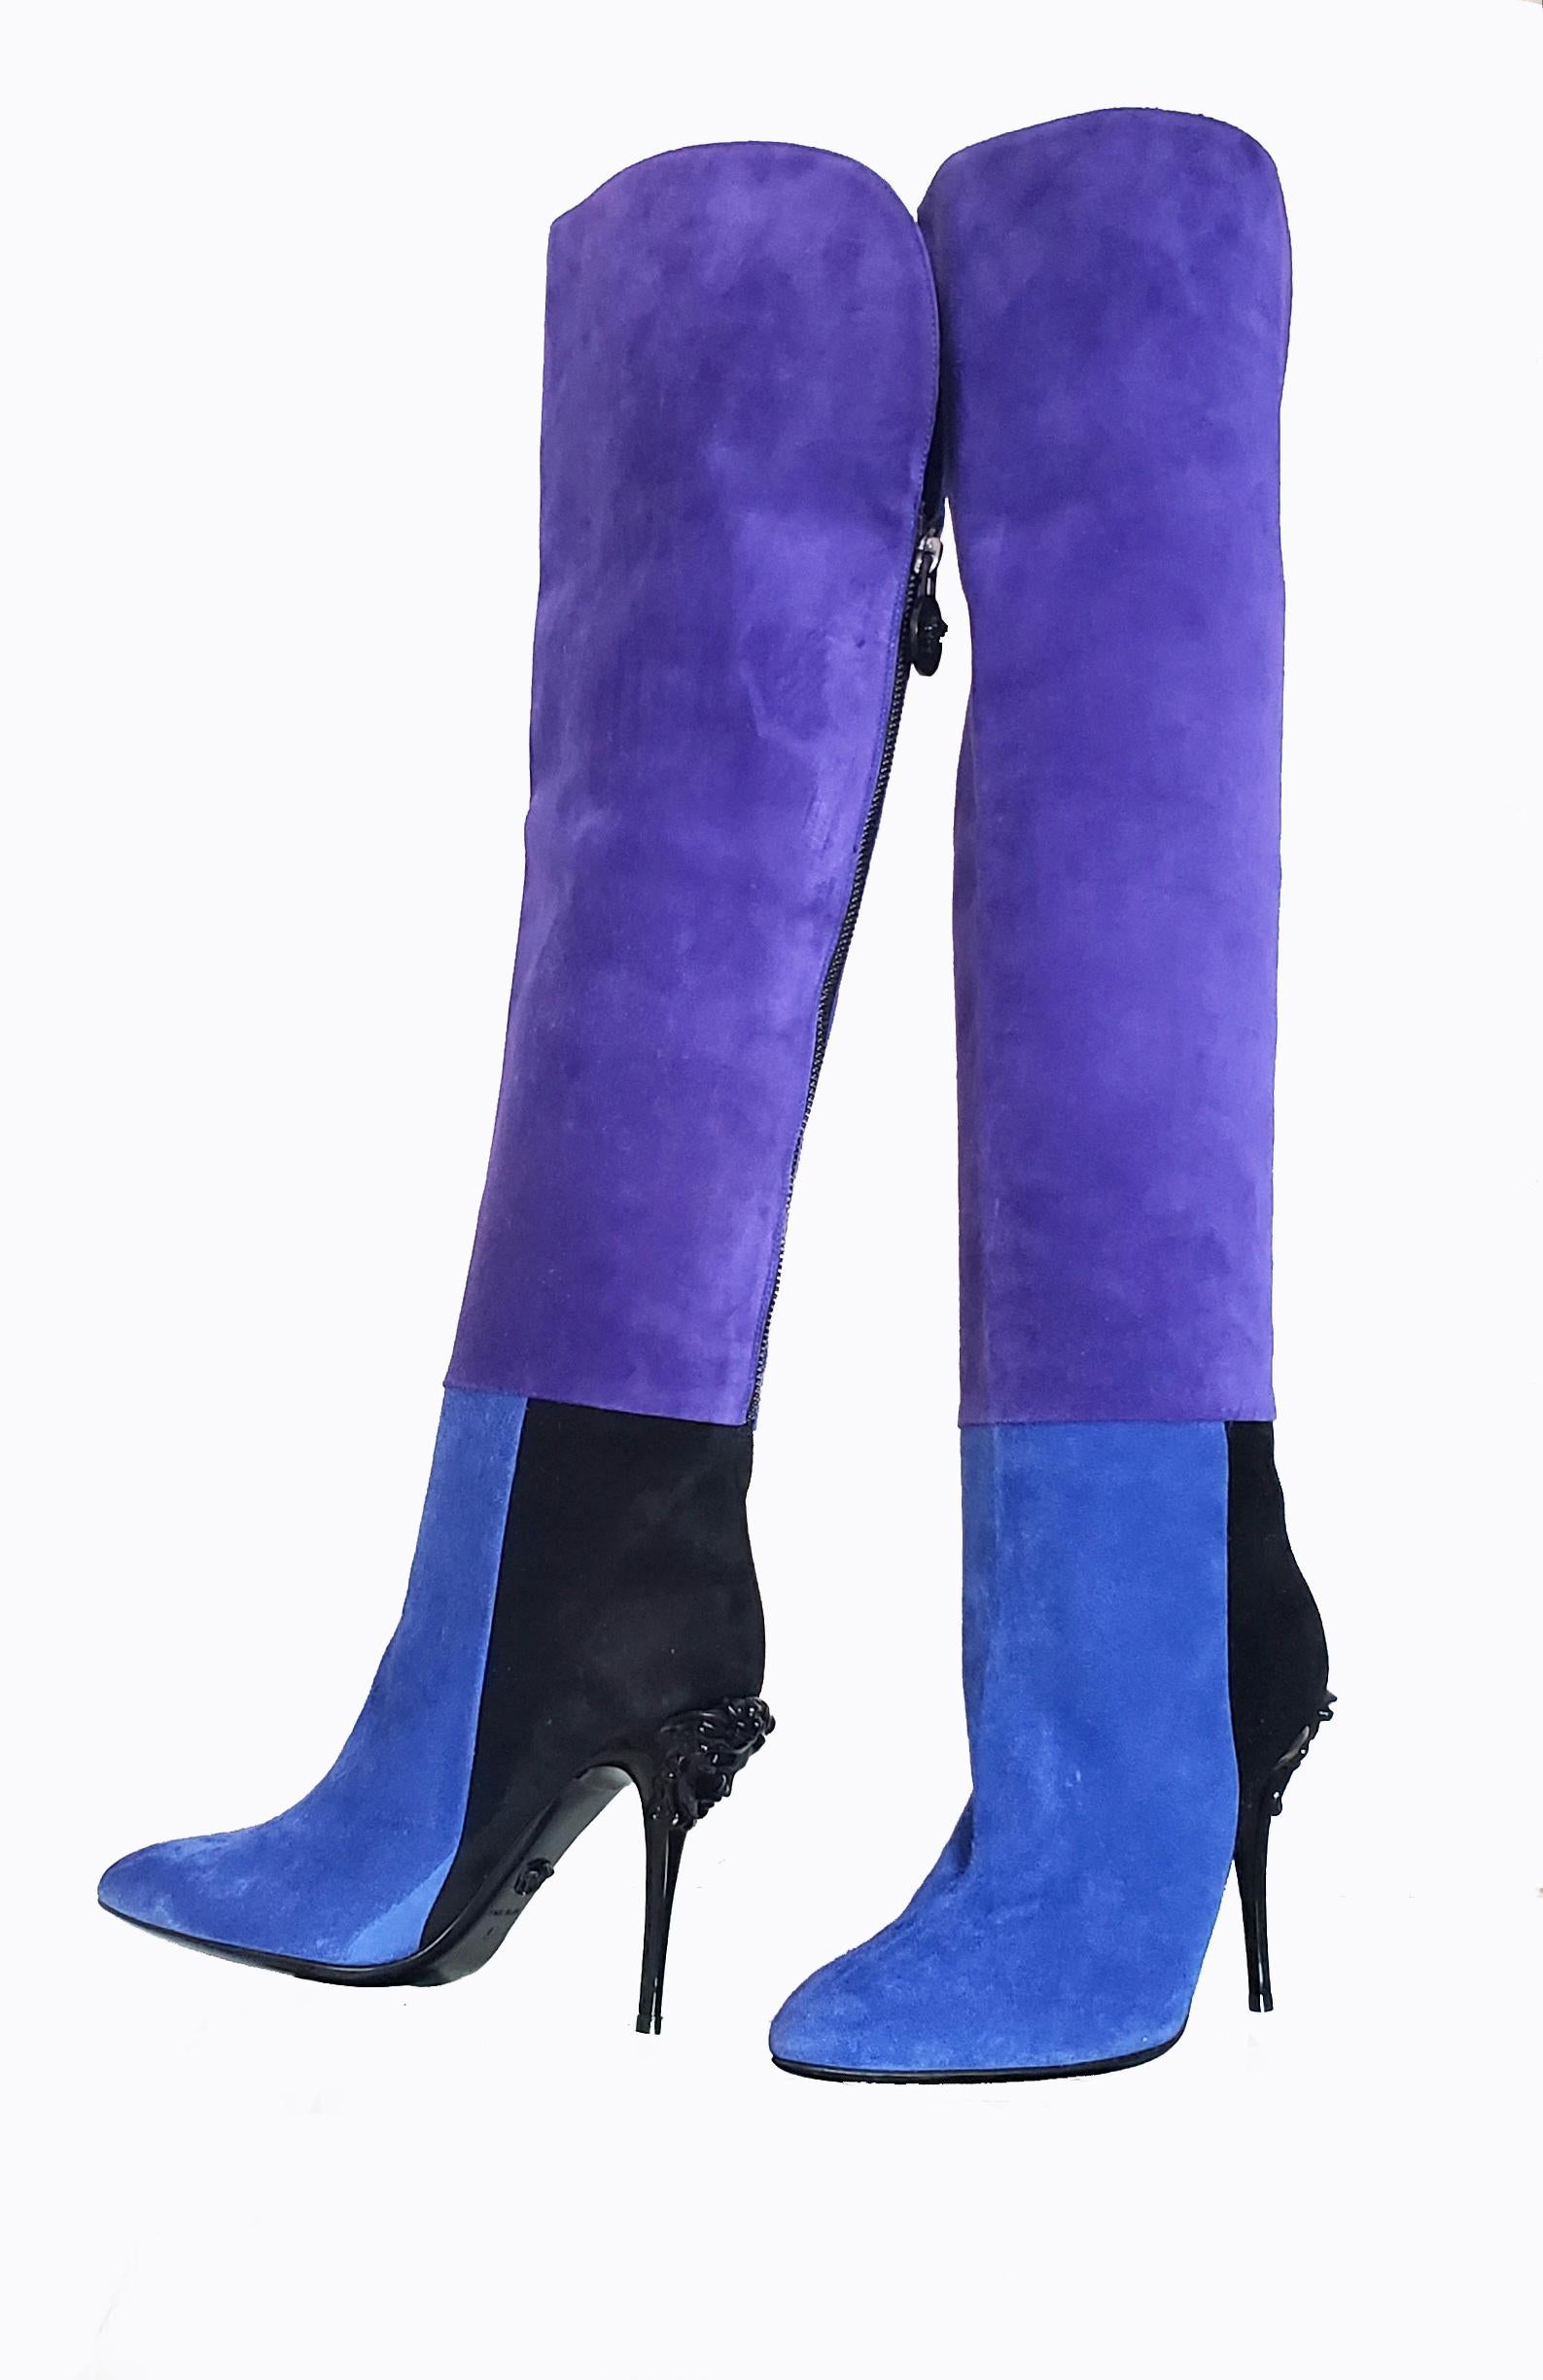 VERSACE BOOTS

These Palazzo color block knee high suede boots are a quintessential style for the modern woman.

Soft suede
Medusa embellished Stiletto heel
Content: 100% leather

Made in Italy

IT Size 37 - US 7
Heel height 4